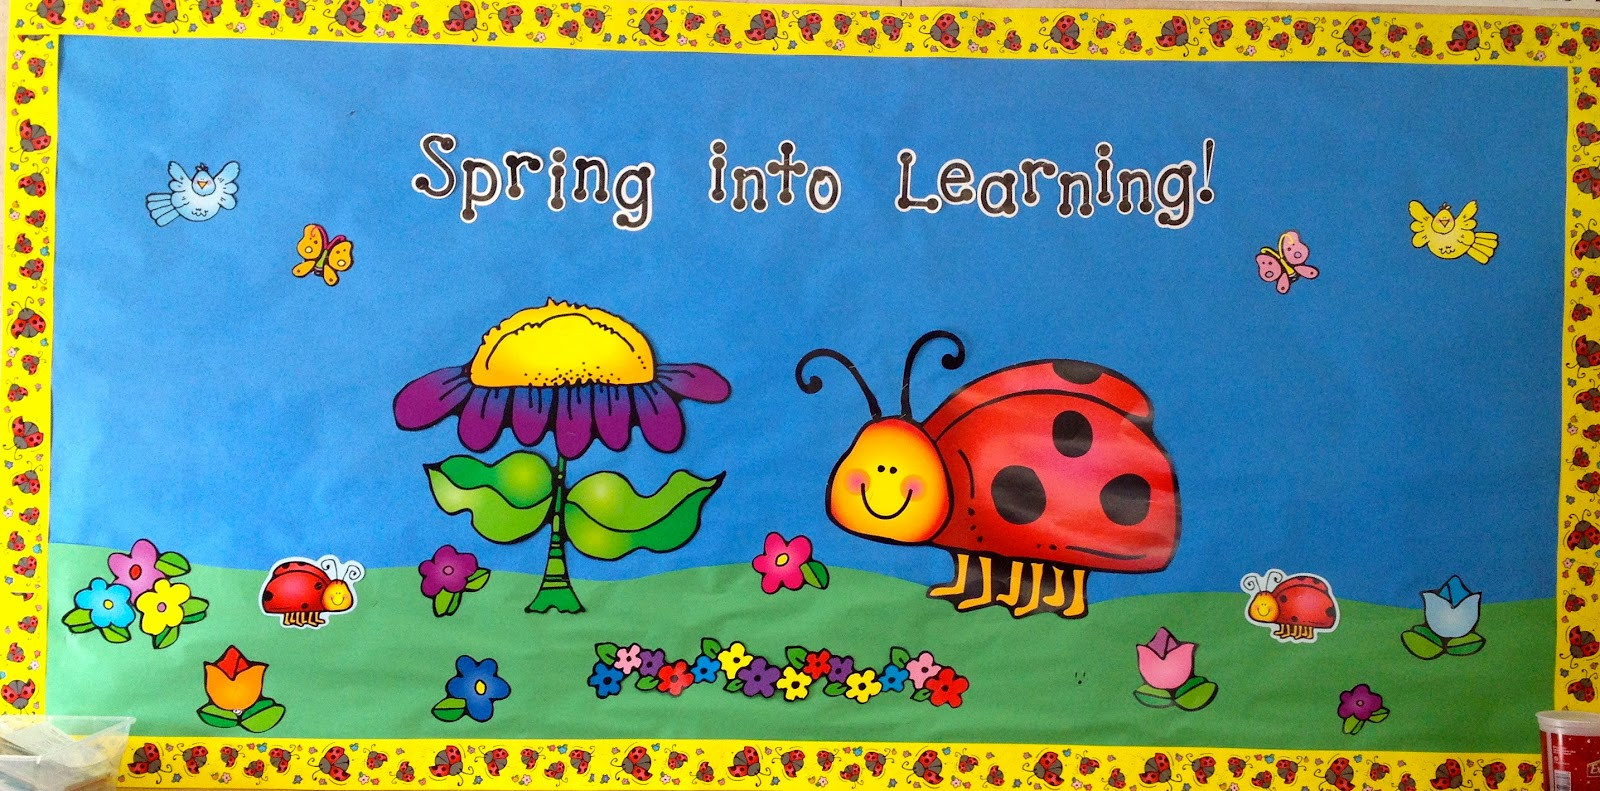 Spring Ideas Bulletin Boards
 Some Mediocre Bulletin Boards That Took Way Too Long to